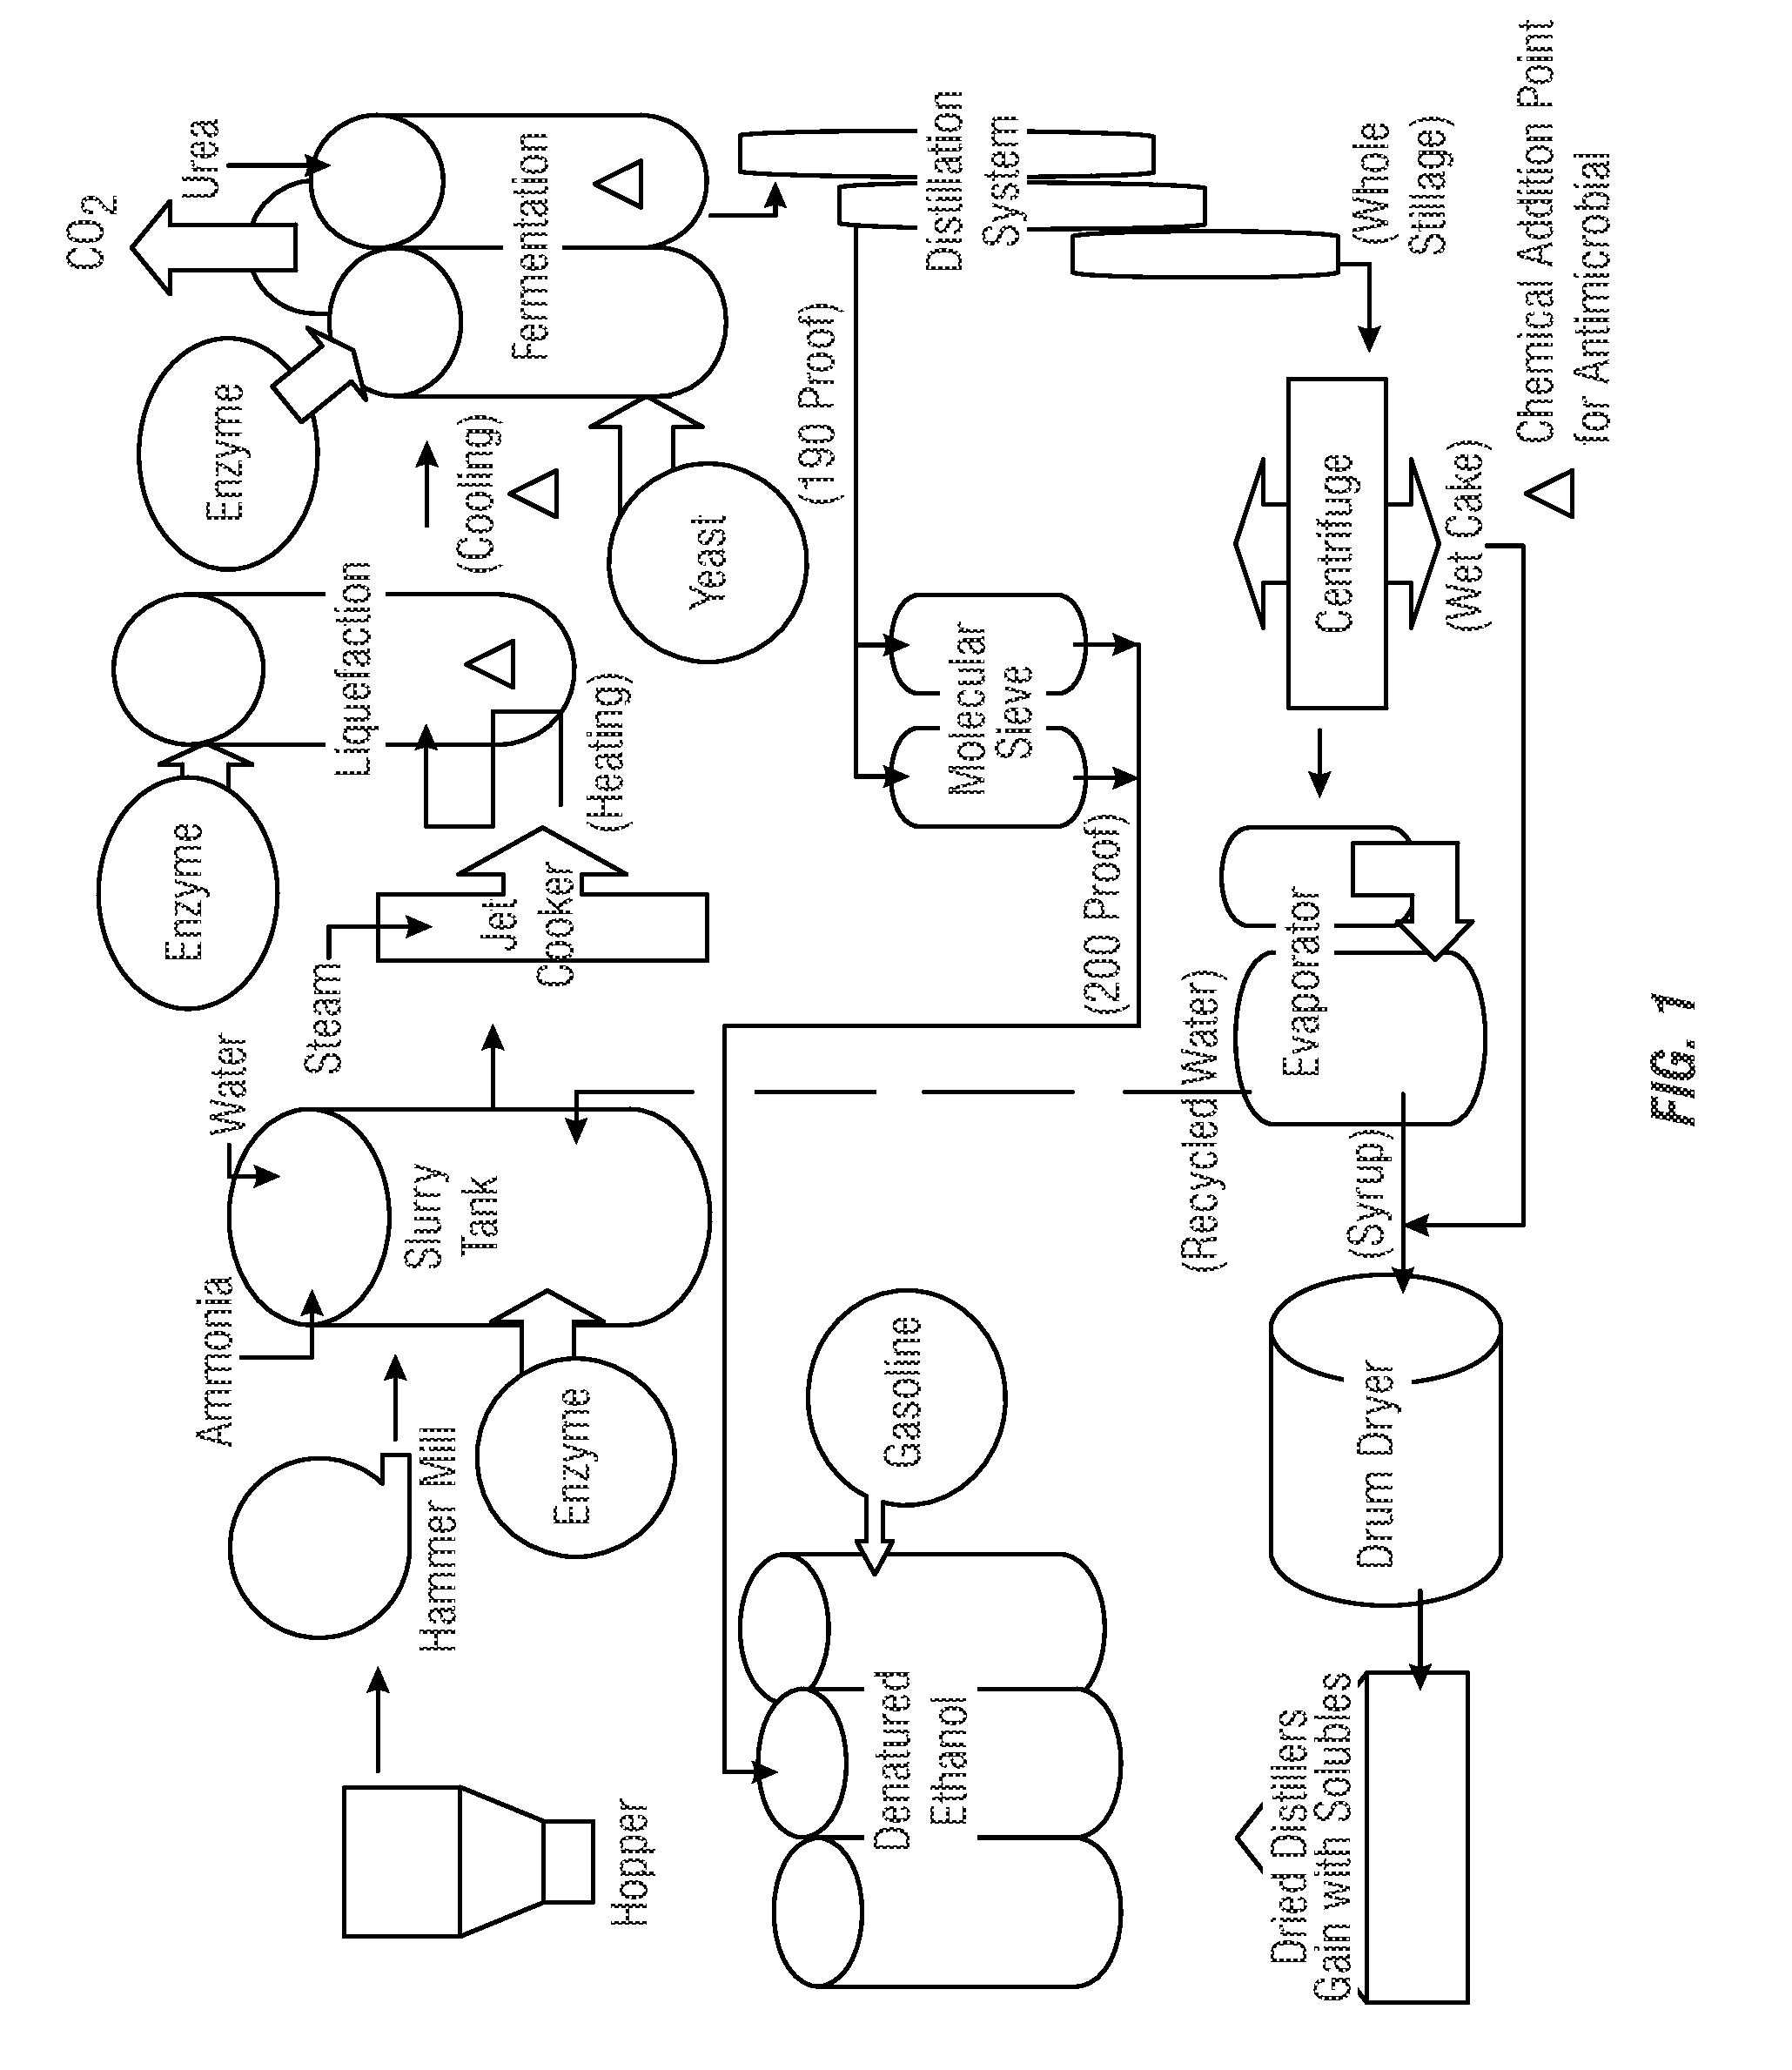 Methods using peracids for controlling corn ethanol fermentation process infection and yield loss